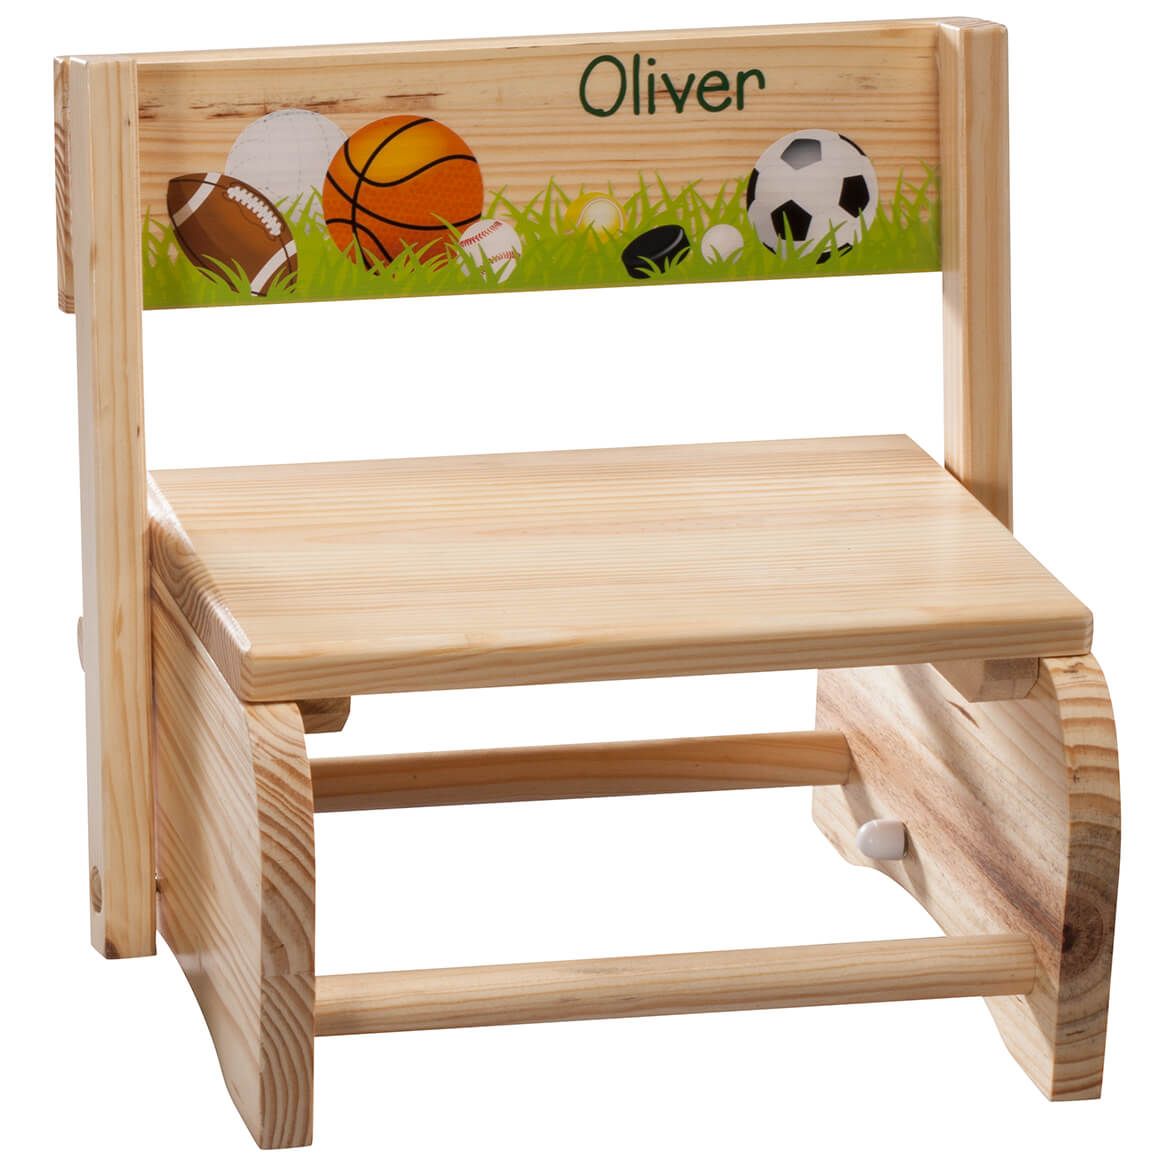 Personalized Children's Sports Step Stool + '-' + 365668